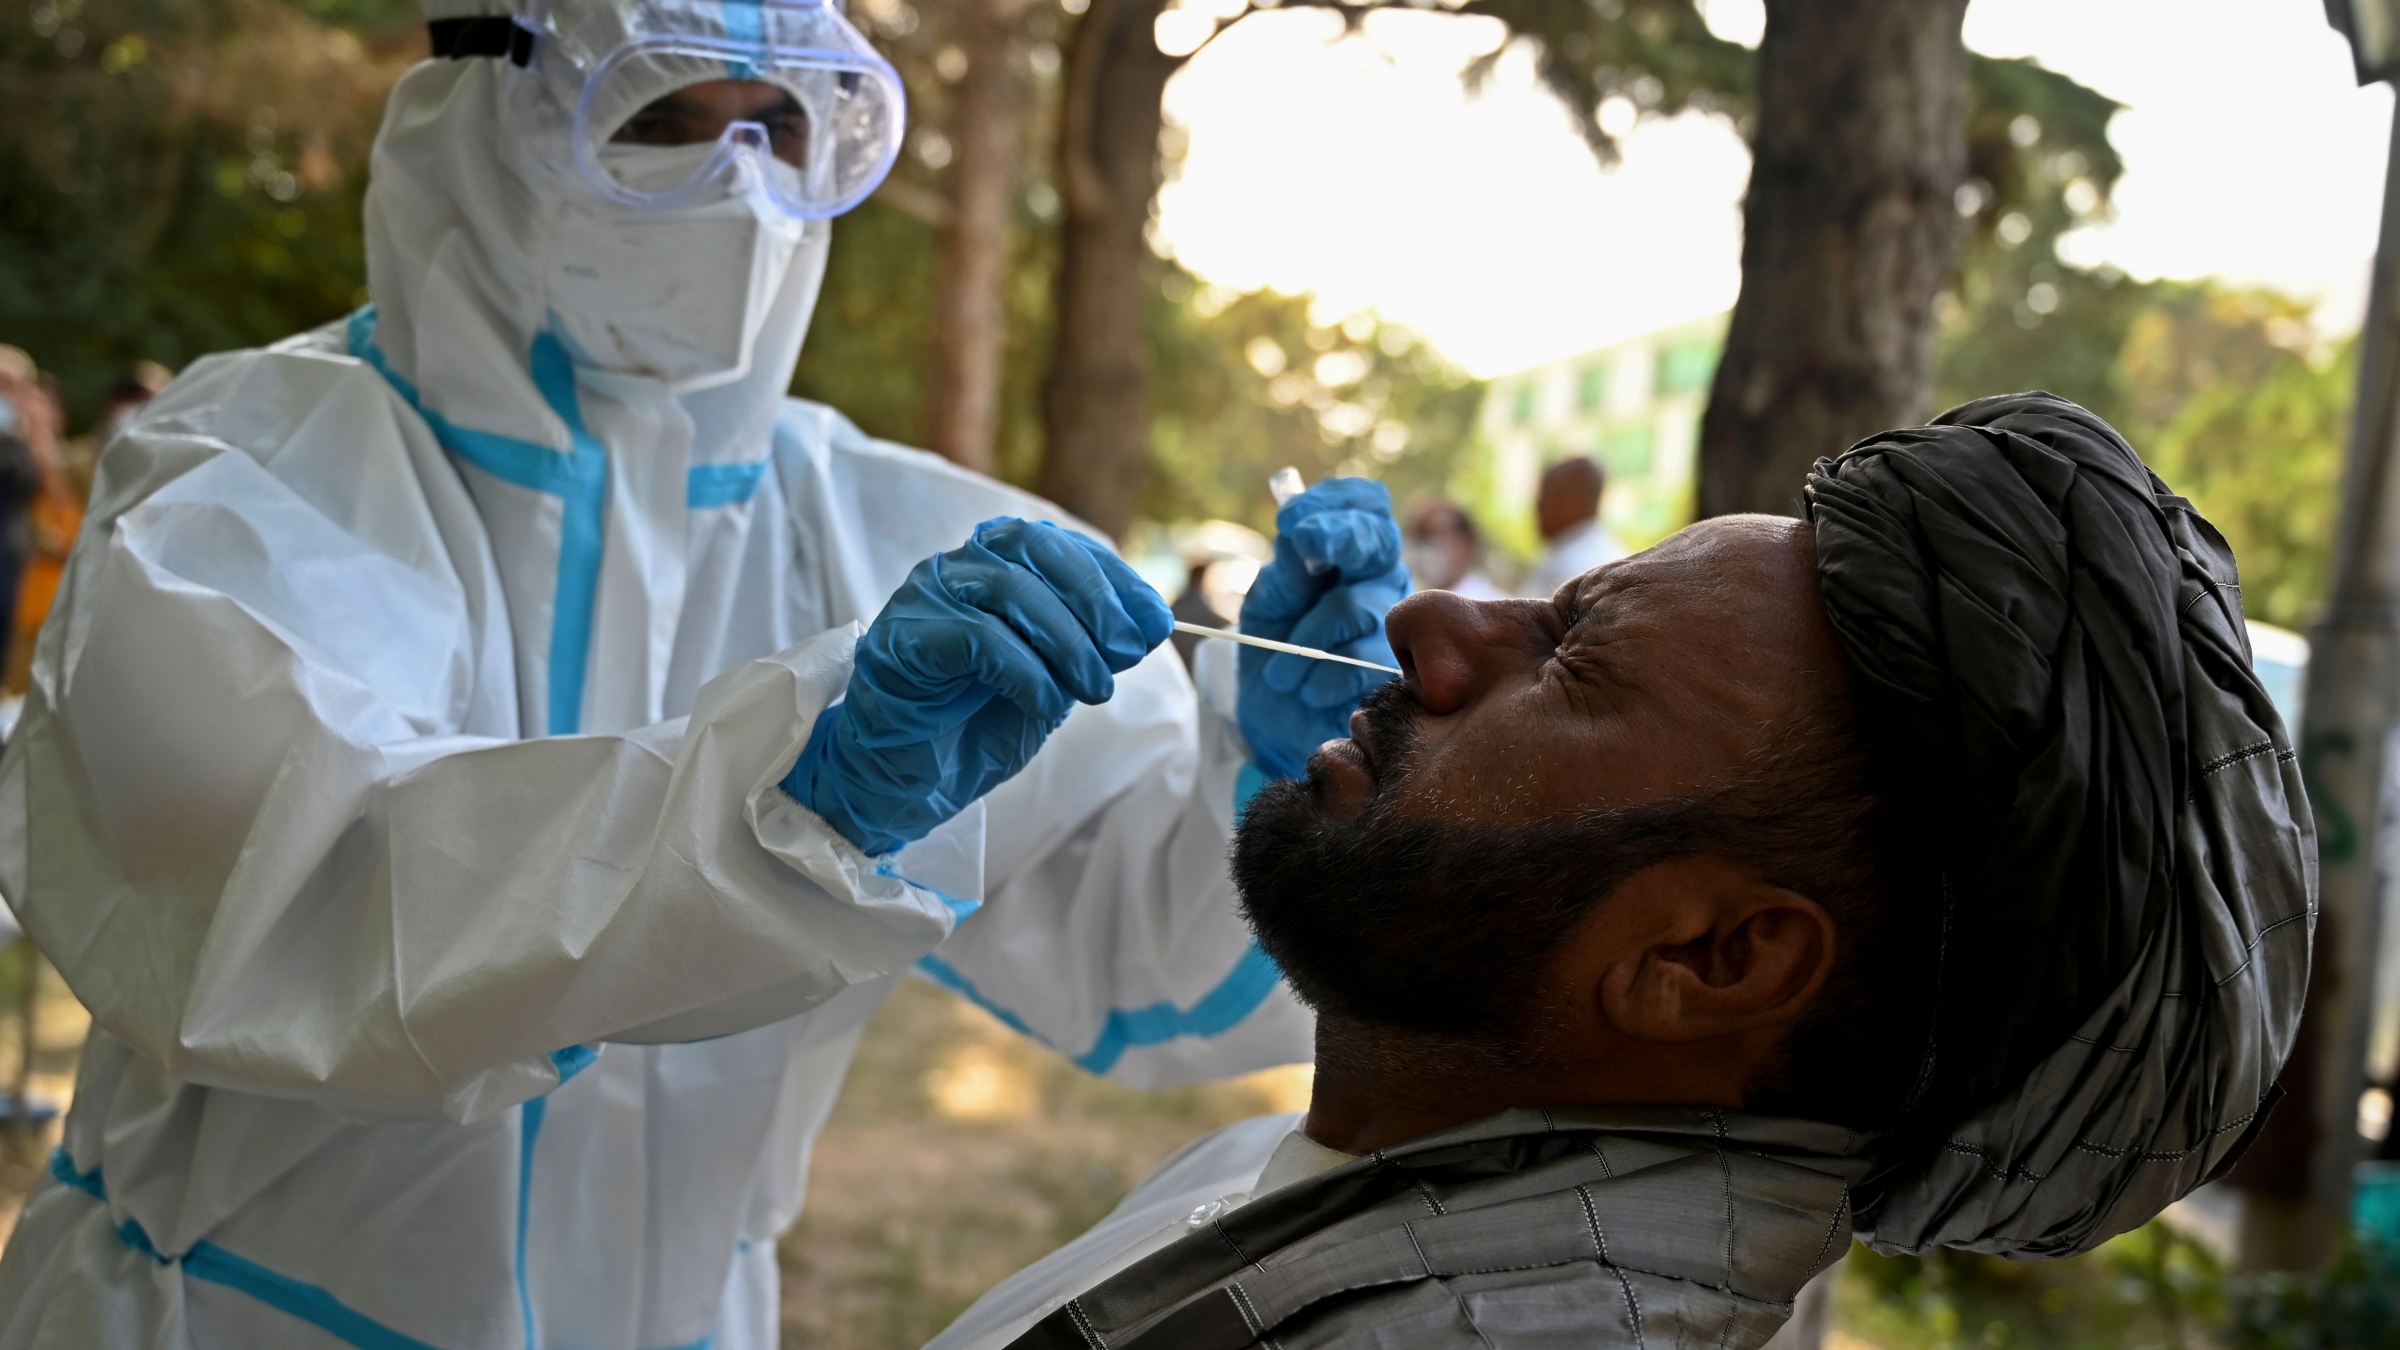 An Afghan man is tested for COVID-19